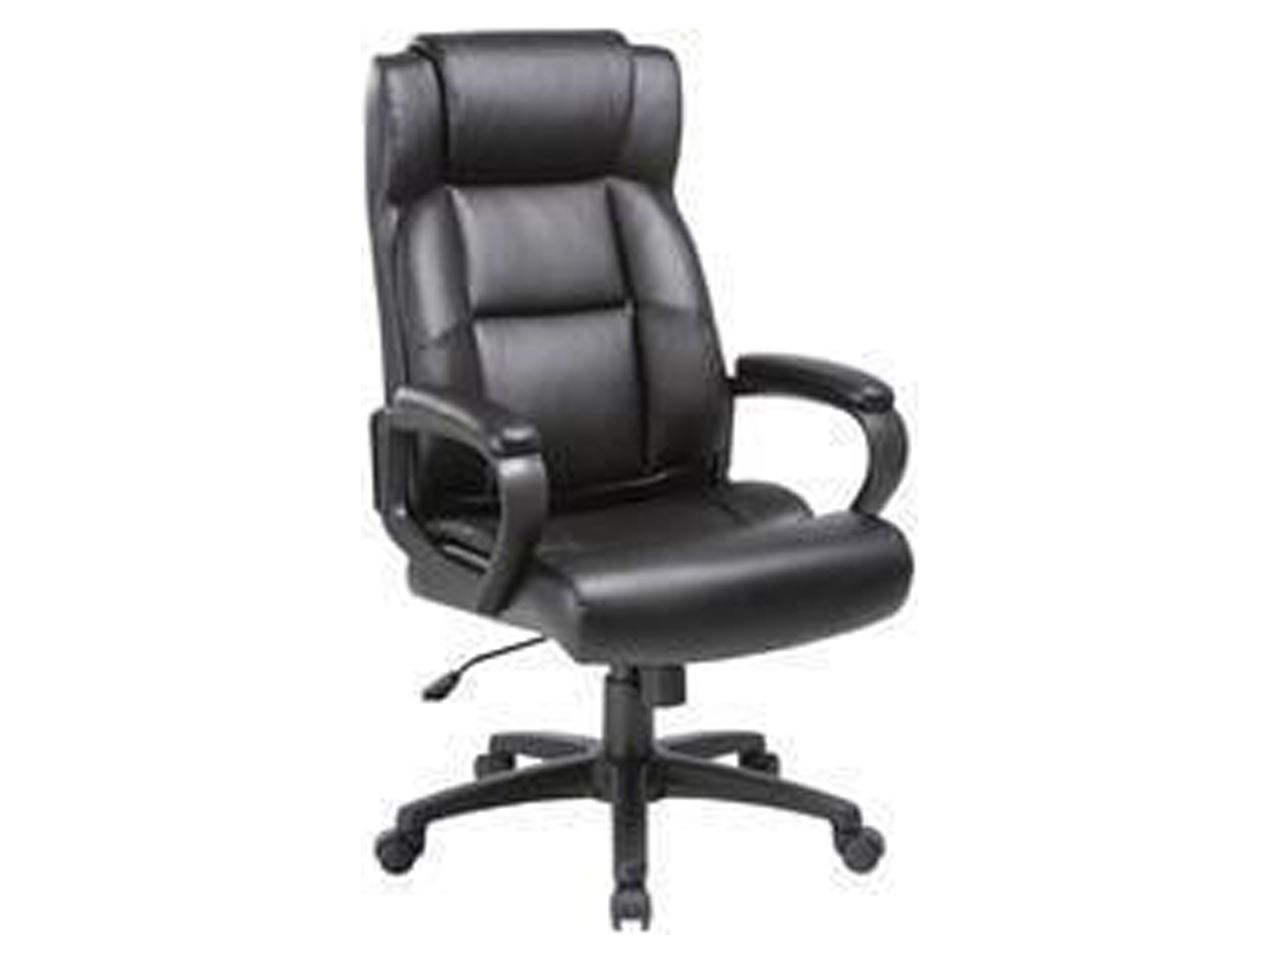 Lorell Soho High-back Leather Executive Chair - Black Bonded Leather Seat - Black Bonded Leather Back - 5-star Base - 18.39" Seat Width - 28.5" Length x 29" Width x 28" Depth x 46" Height - 1 Each - image 5 of 7